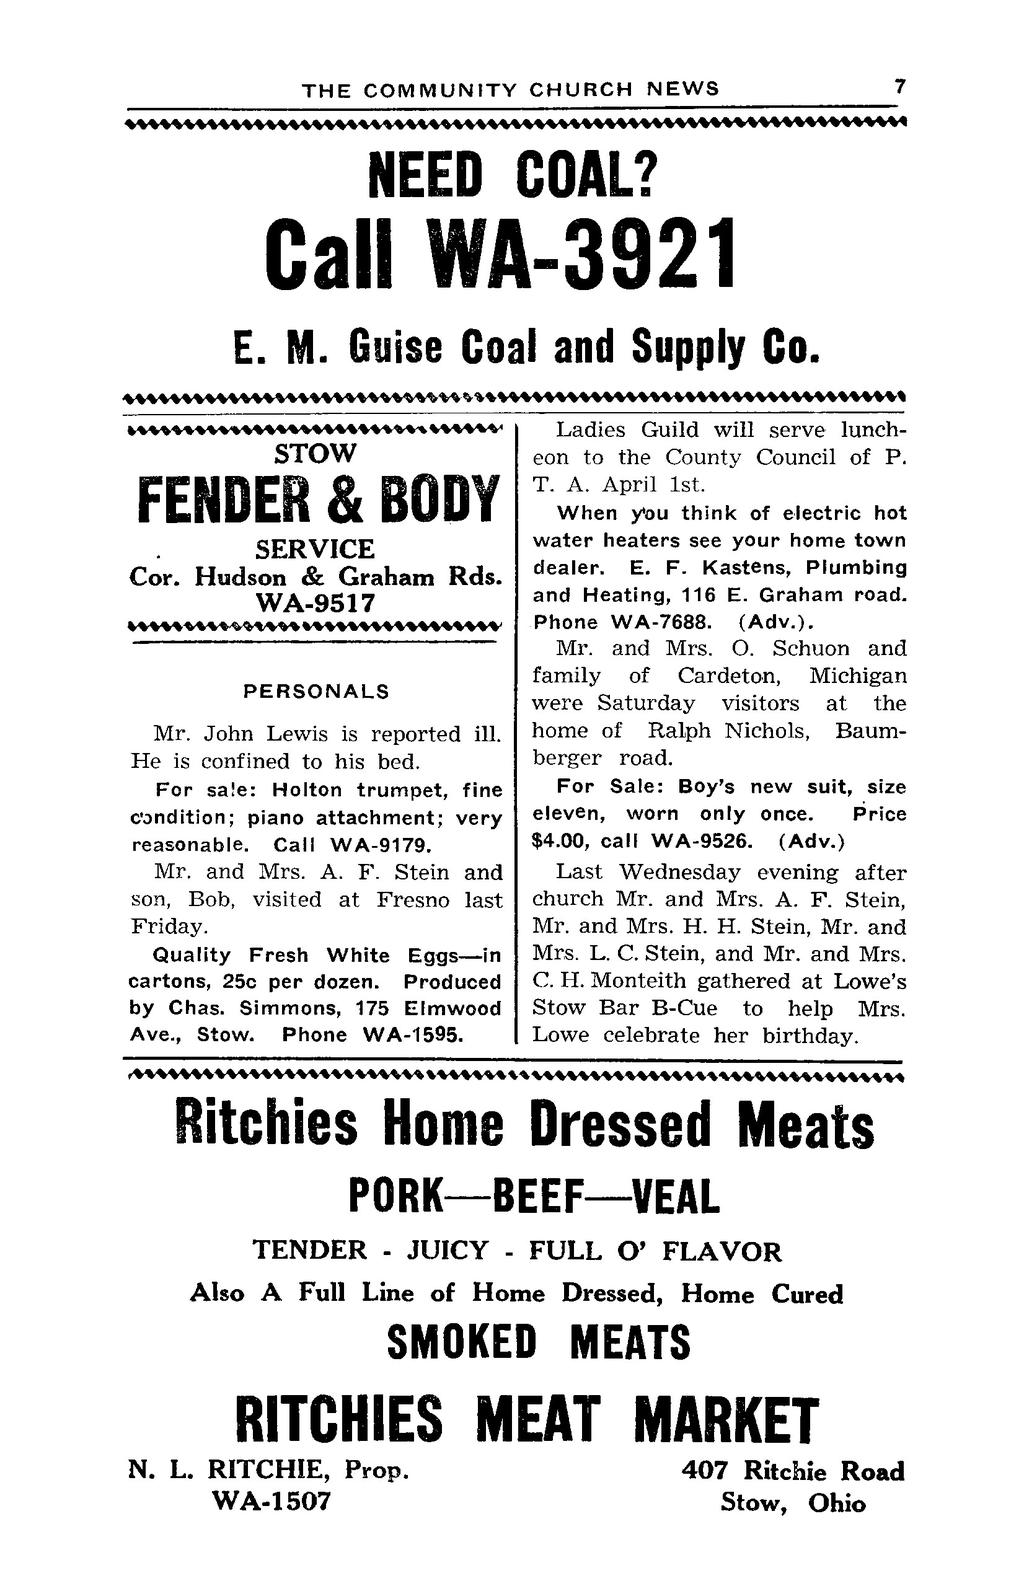 10 NEED COAL? Call WA-3921 E. M. Guise Coal and Supply Co. STOW FENDER & BODY SERVICE Cor. Hudson & Graham Rds. WA-9517 PERSONALS Mr. John Lewis is reported ill. He is confined to his bed.